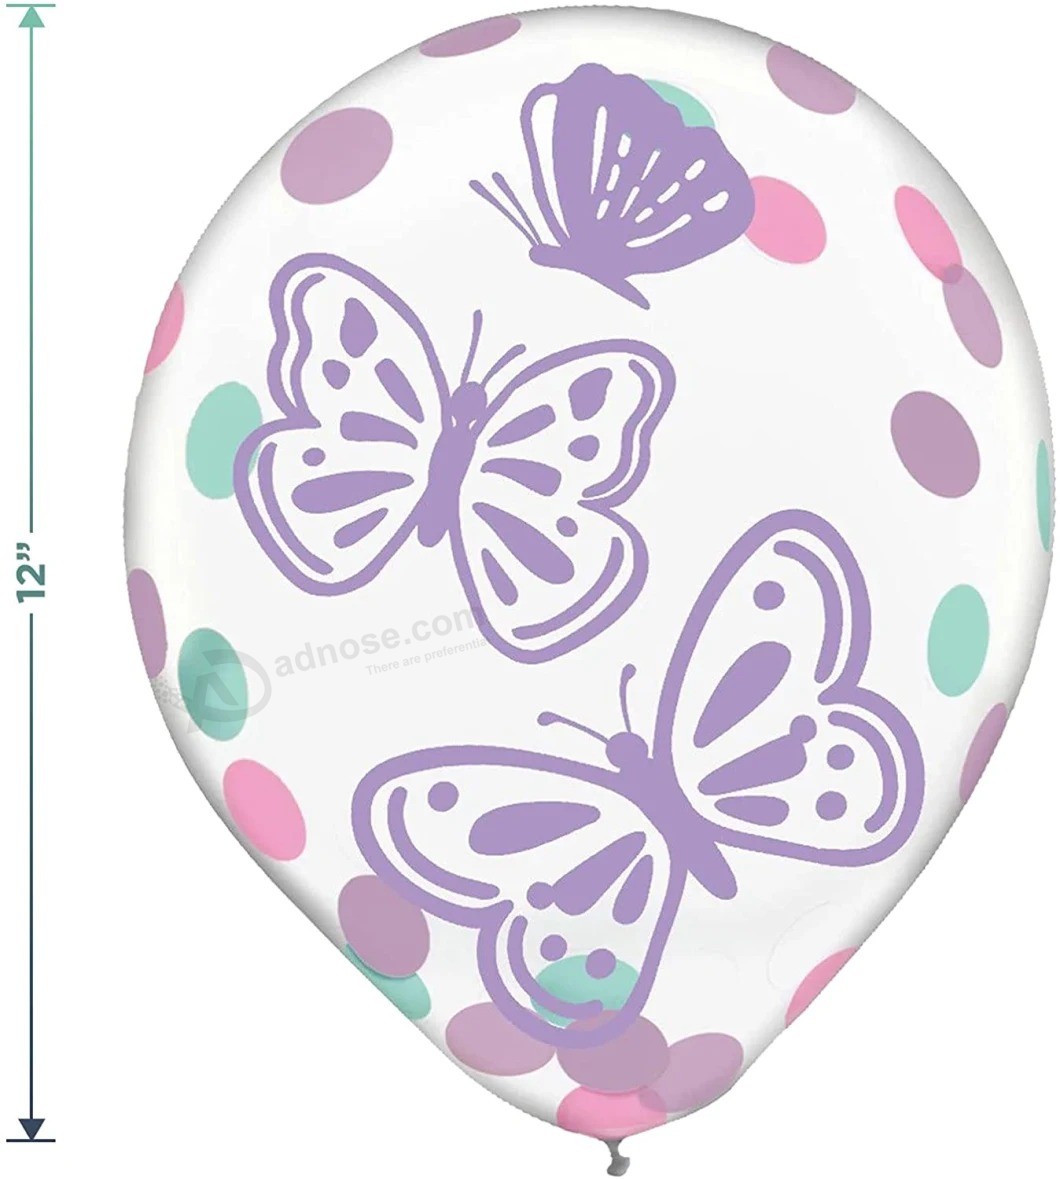 Butterfly Party Flutter Floral Paper Dessert Plates, Napkins, Table Cover, and Balloons Set (Serves 16) Party Tableware